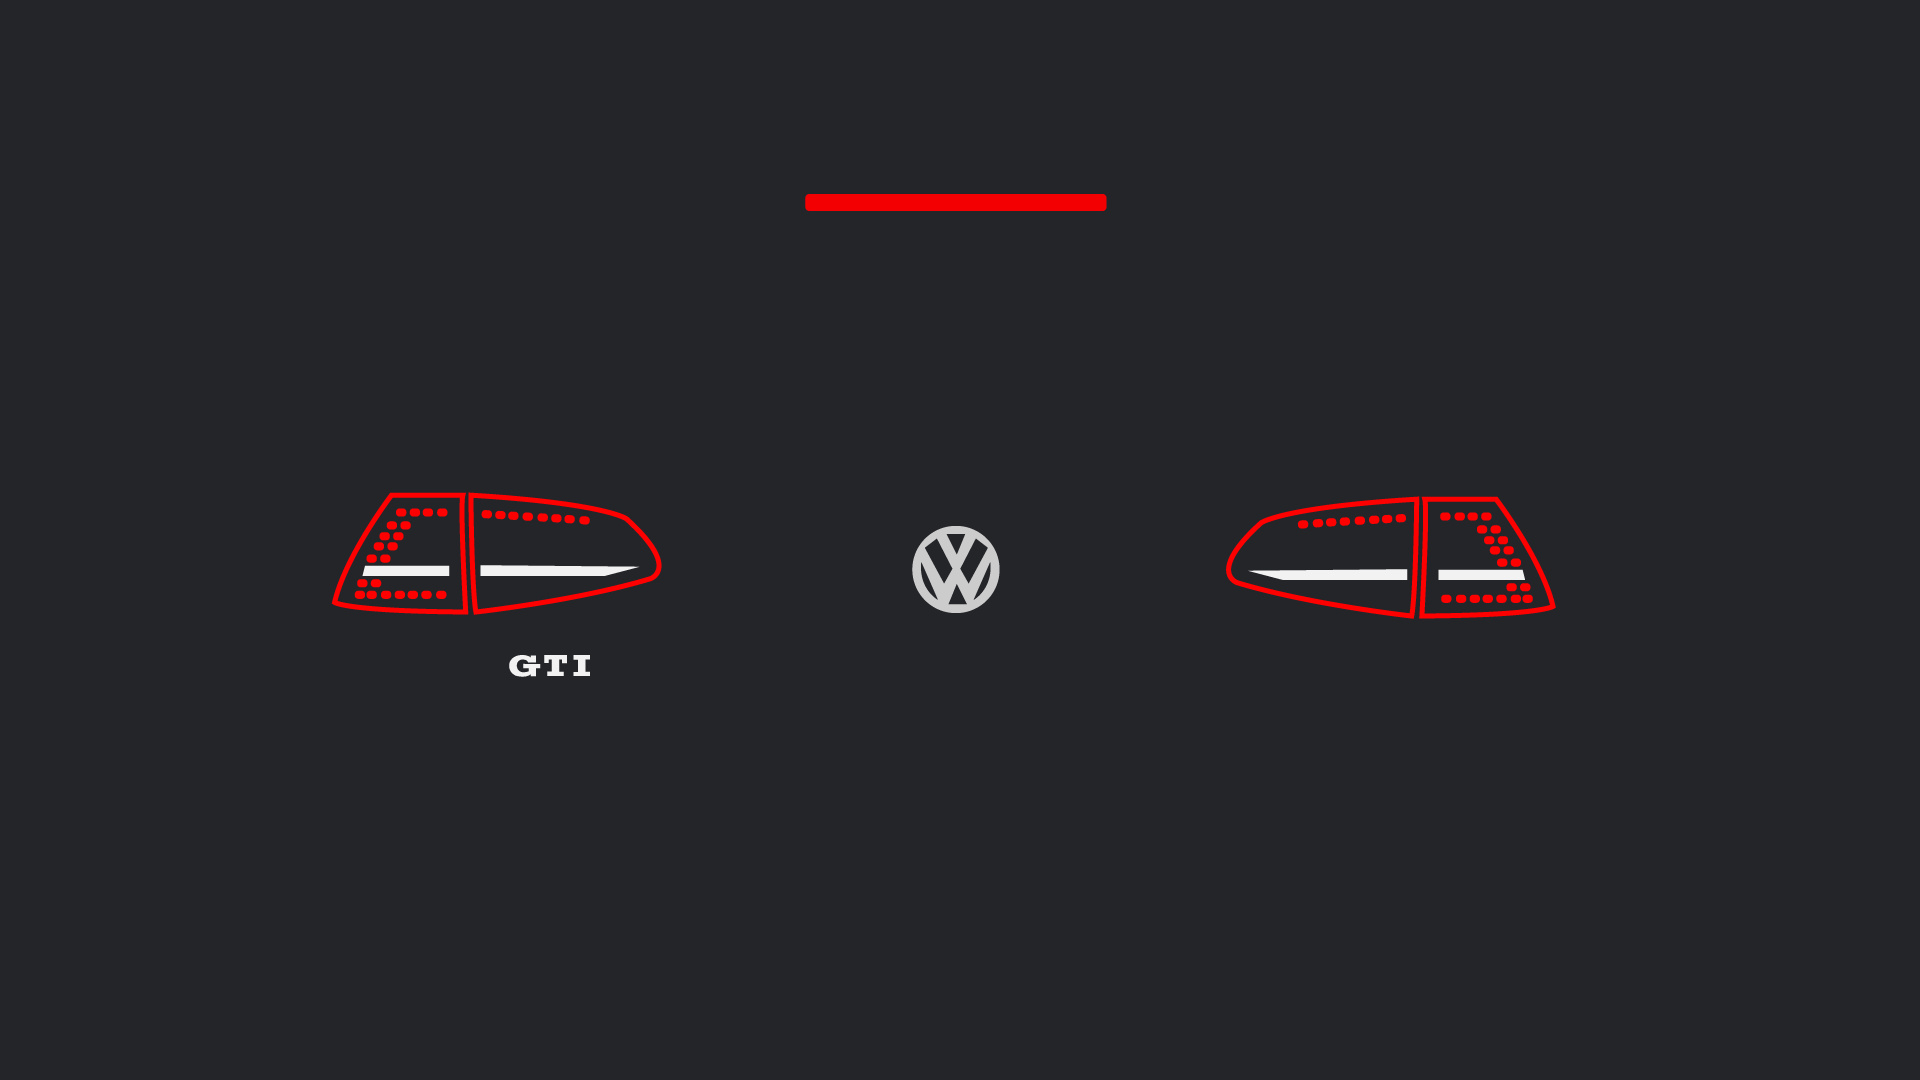 Golf GTI: Mk7, Taillights, Minimalistic, A 3 or 5-door hatchback produced by Volkswagen since 1975. 1920x1080 Full HD Wallpaper.